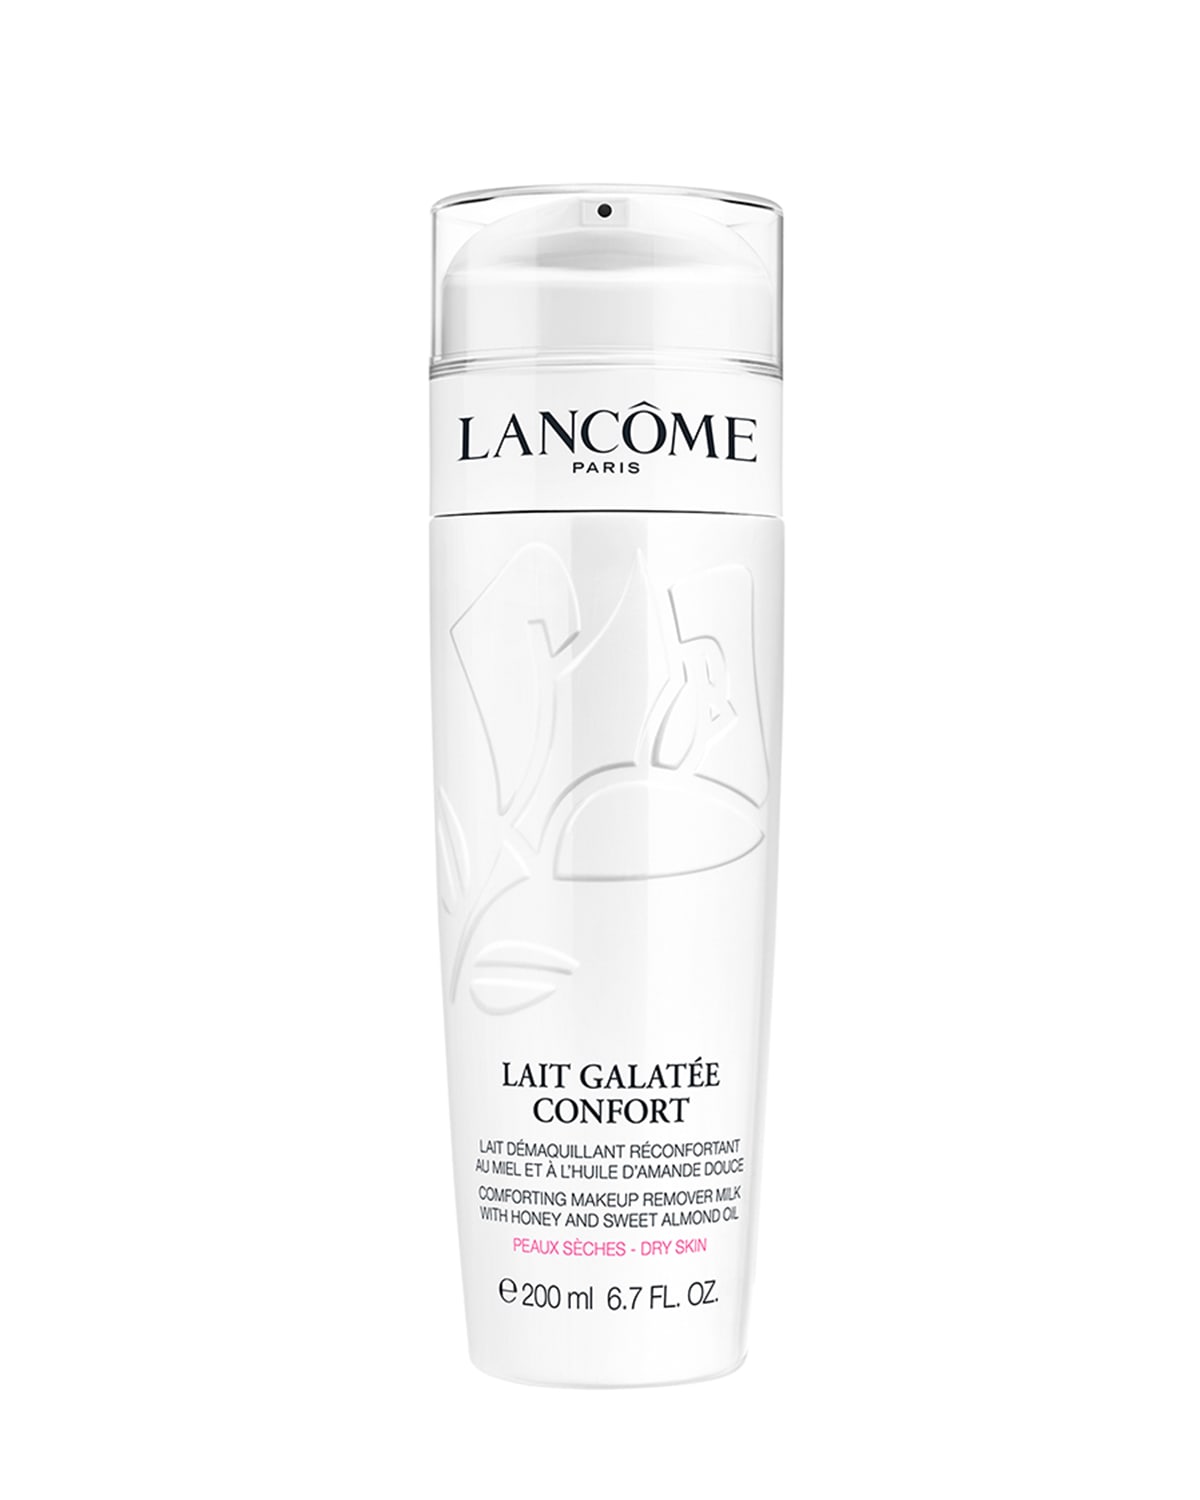 GALATEE CONFORT Comforting Milky Creme Cleanser, 6.7 oz.